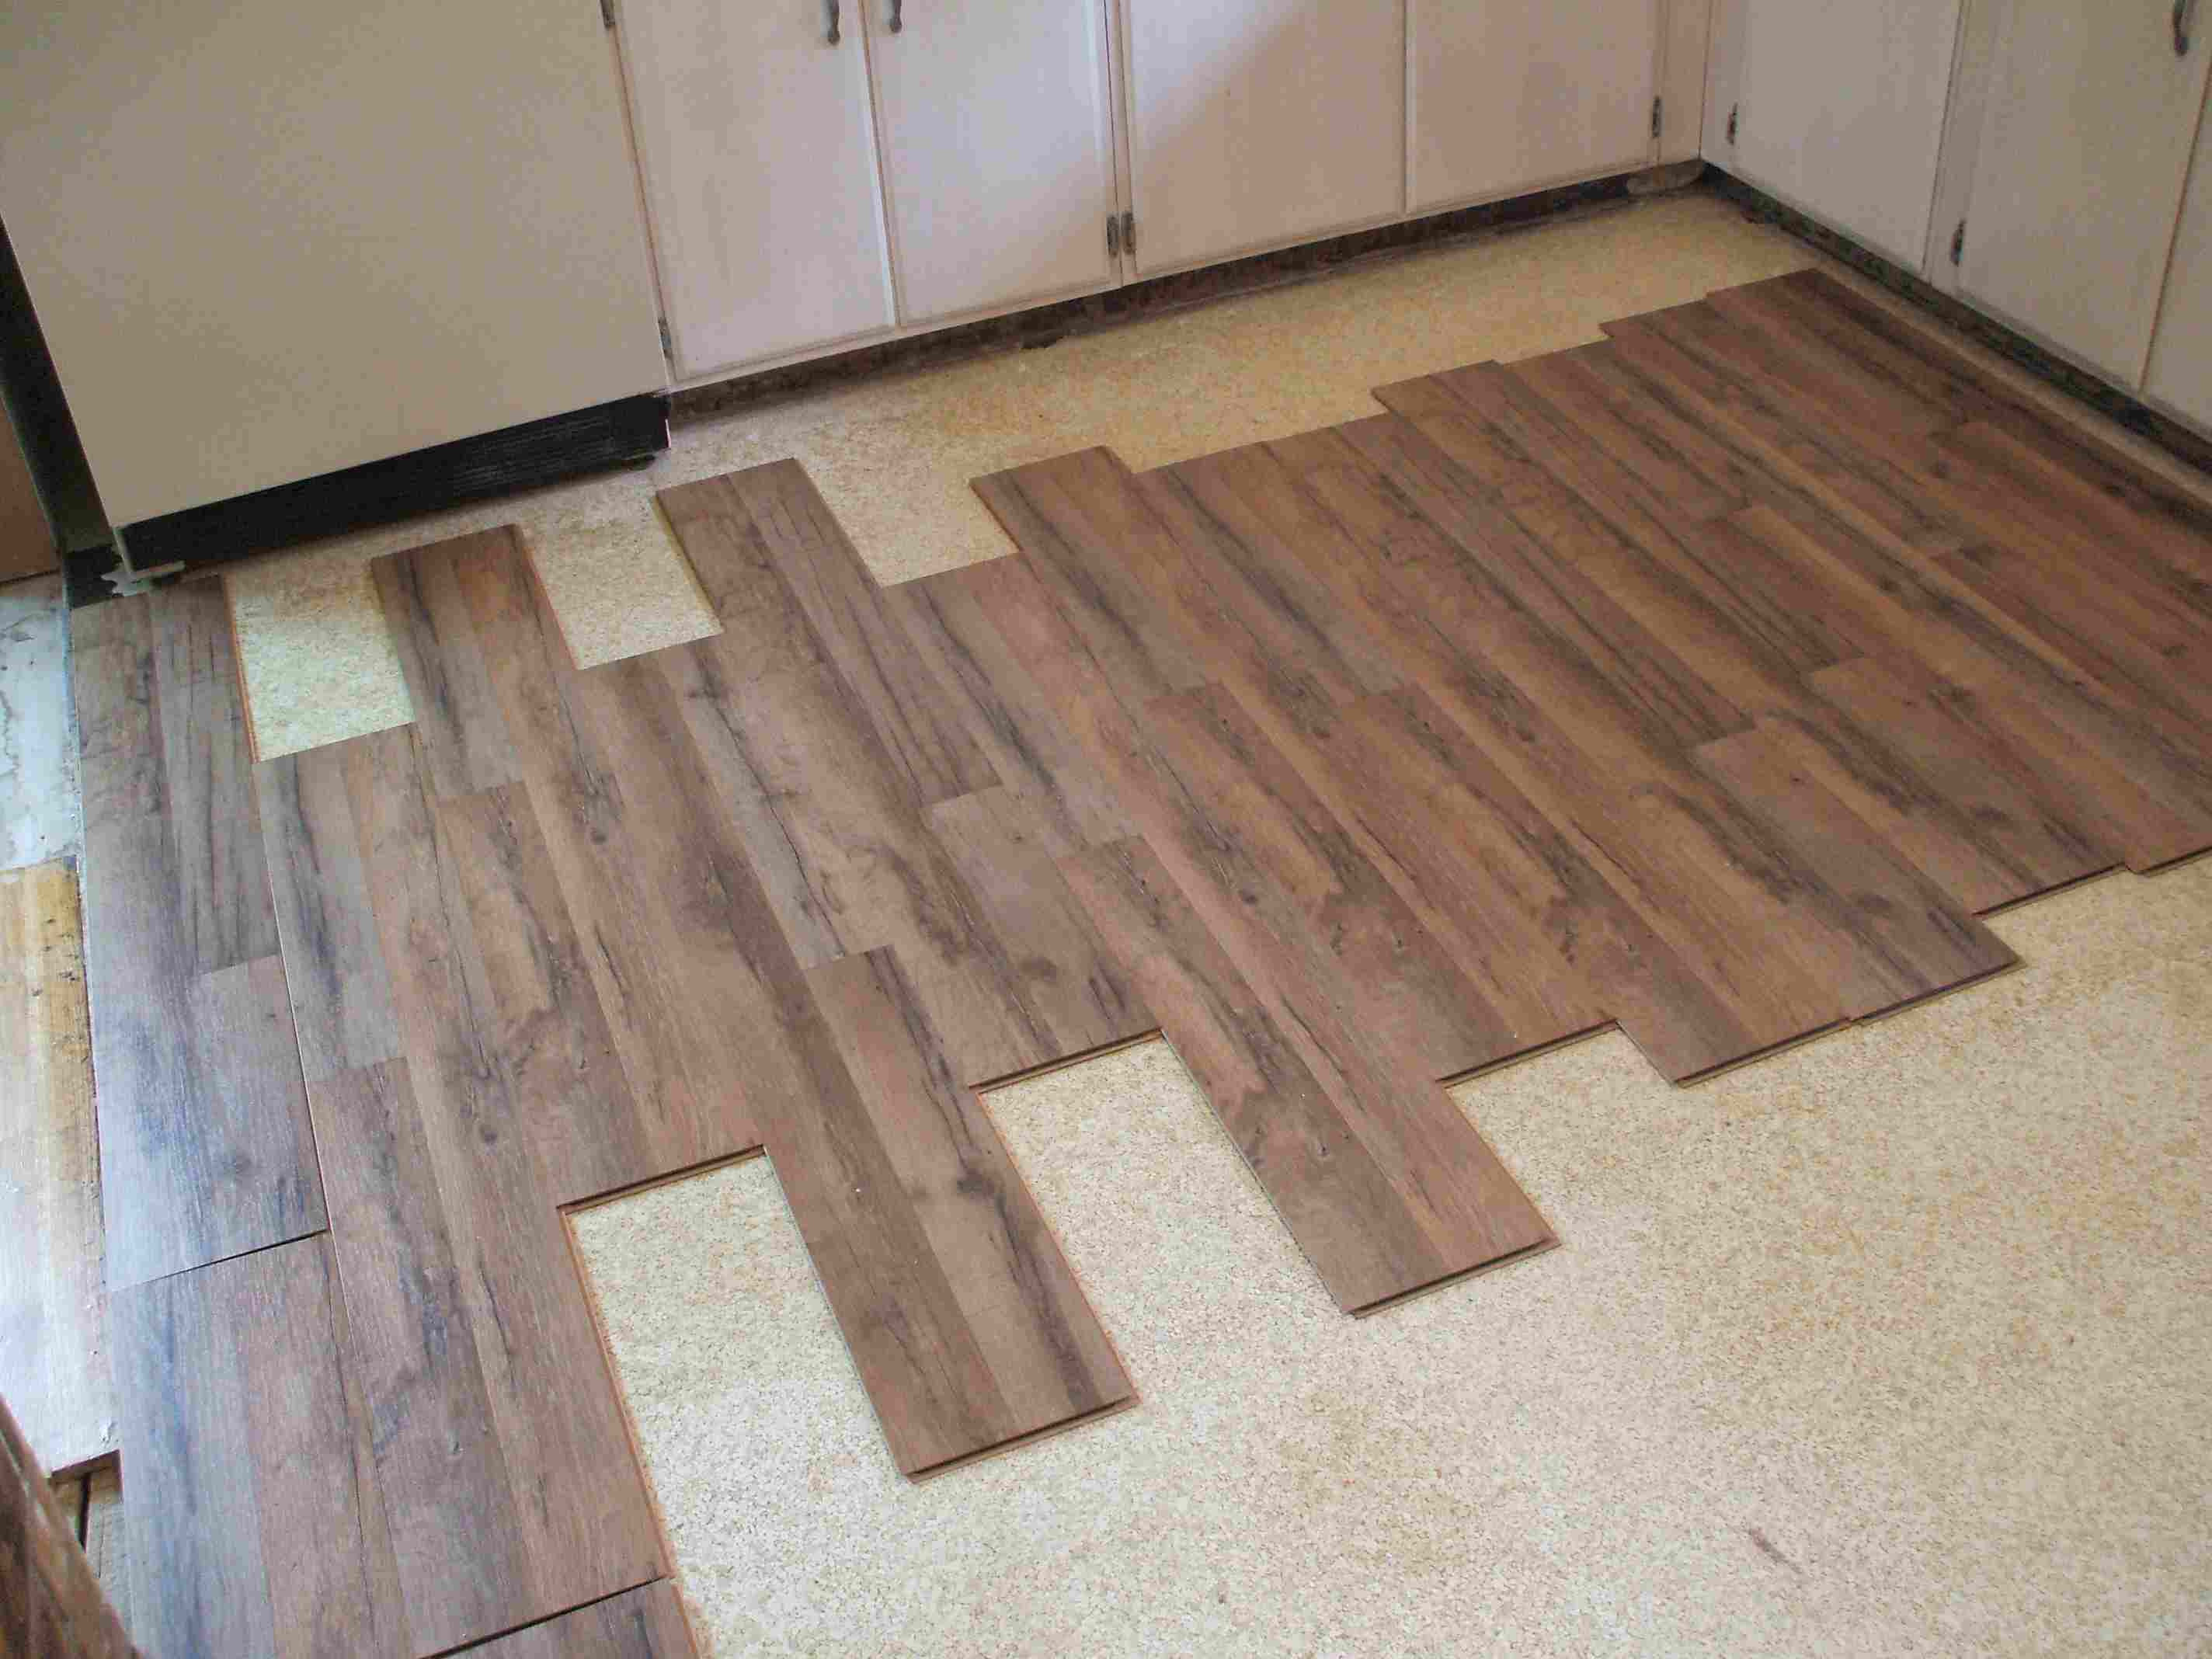 23 Fabulous How Much Will It Cost to Install Hardwood Floors 2024 free download how much will it cost to install hardwood floors of laminate flooring installation made easy pertaining to installing laminate eyeballing layout 56a49d075f9b58b7d0d7d693 jpg